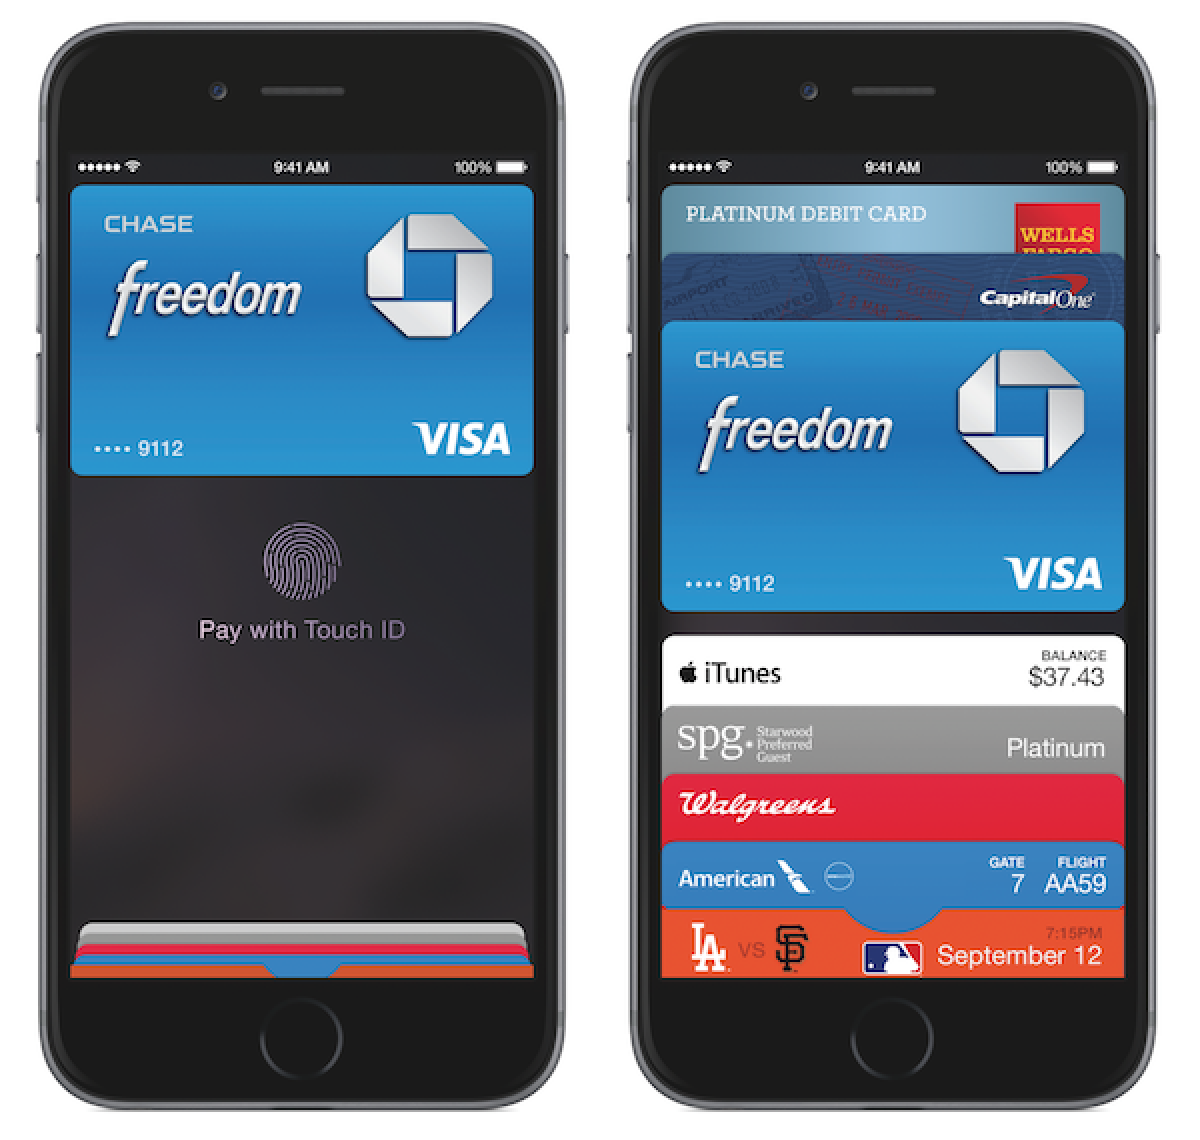 Apple Pay Doubled Mobile Wallet Transactions at Walgreens, Accounted for 50% of Tap-to-Pay ...